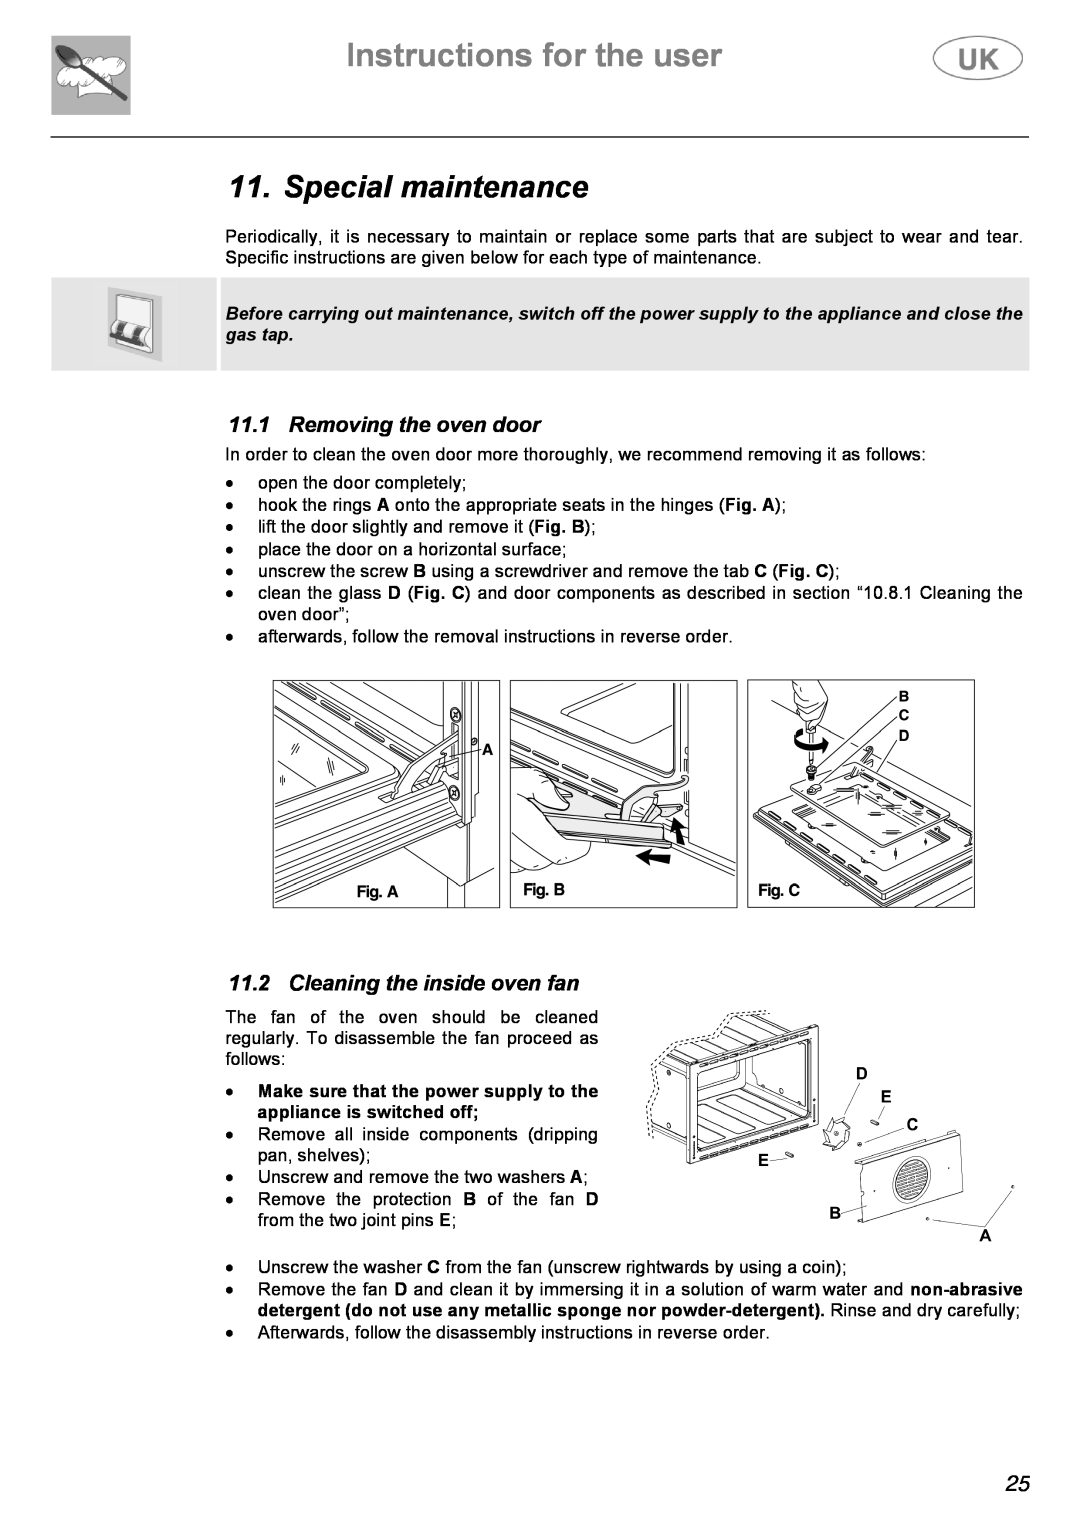 Electrolux C41022G Special maintenance, Removing the oven door, Cleaning the inside oven fan, Instructions for the user 